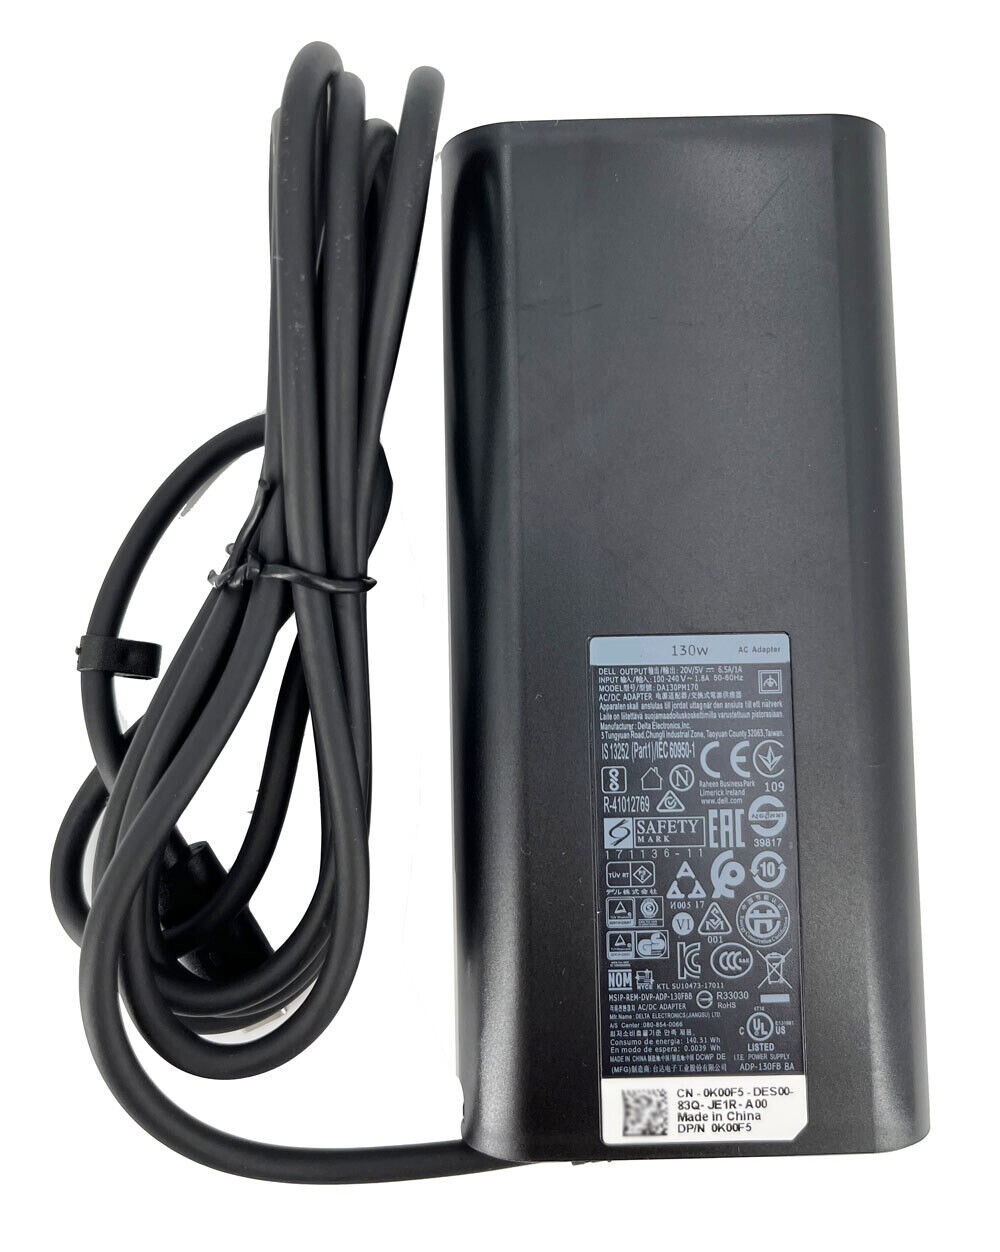 *Brand NEW*For Verizon FiOS G3100 Home Network Modem/Router AC Adapter Power Supply Charger